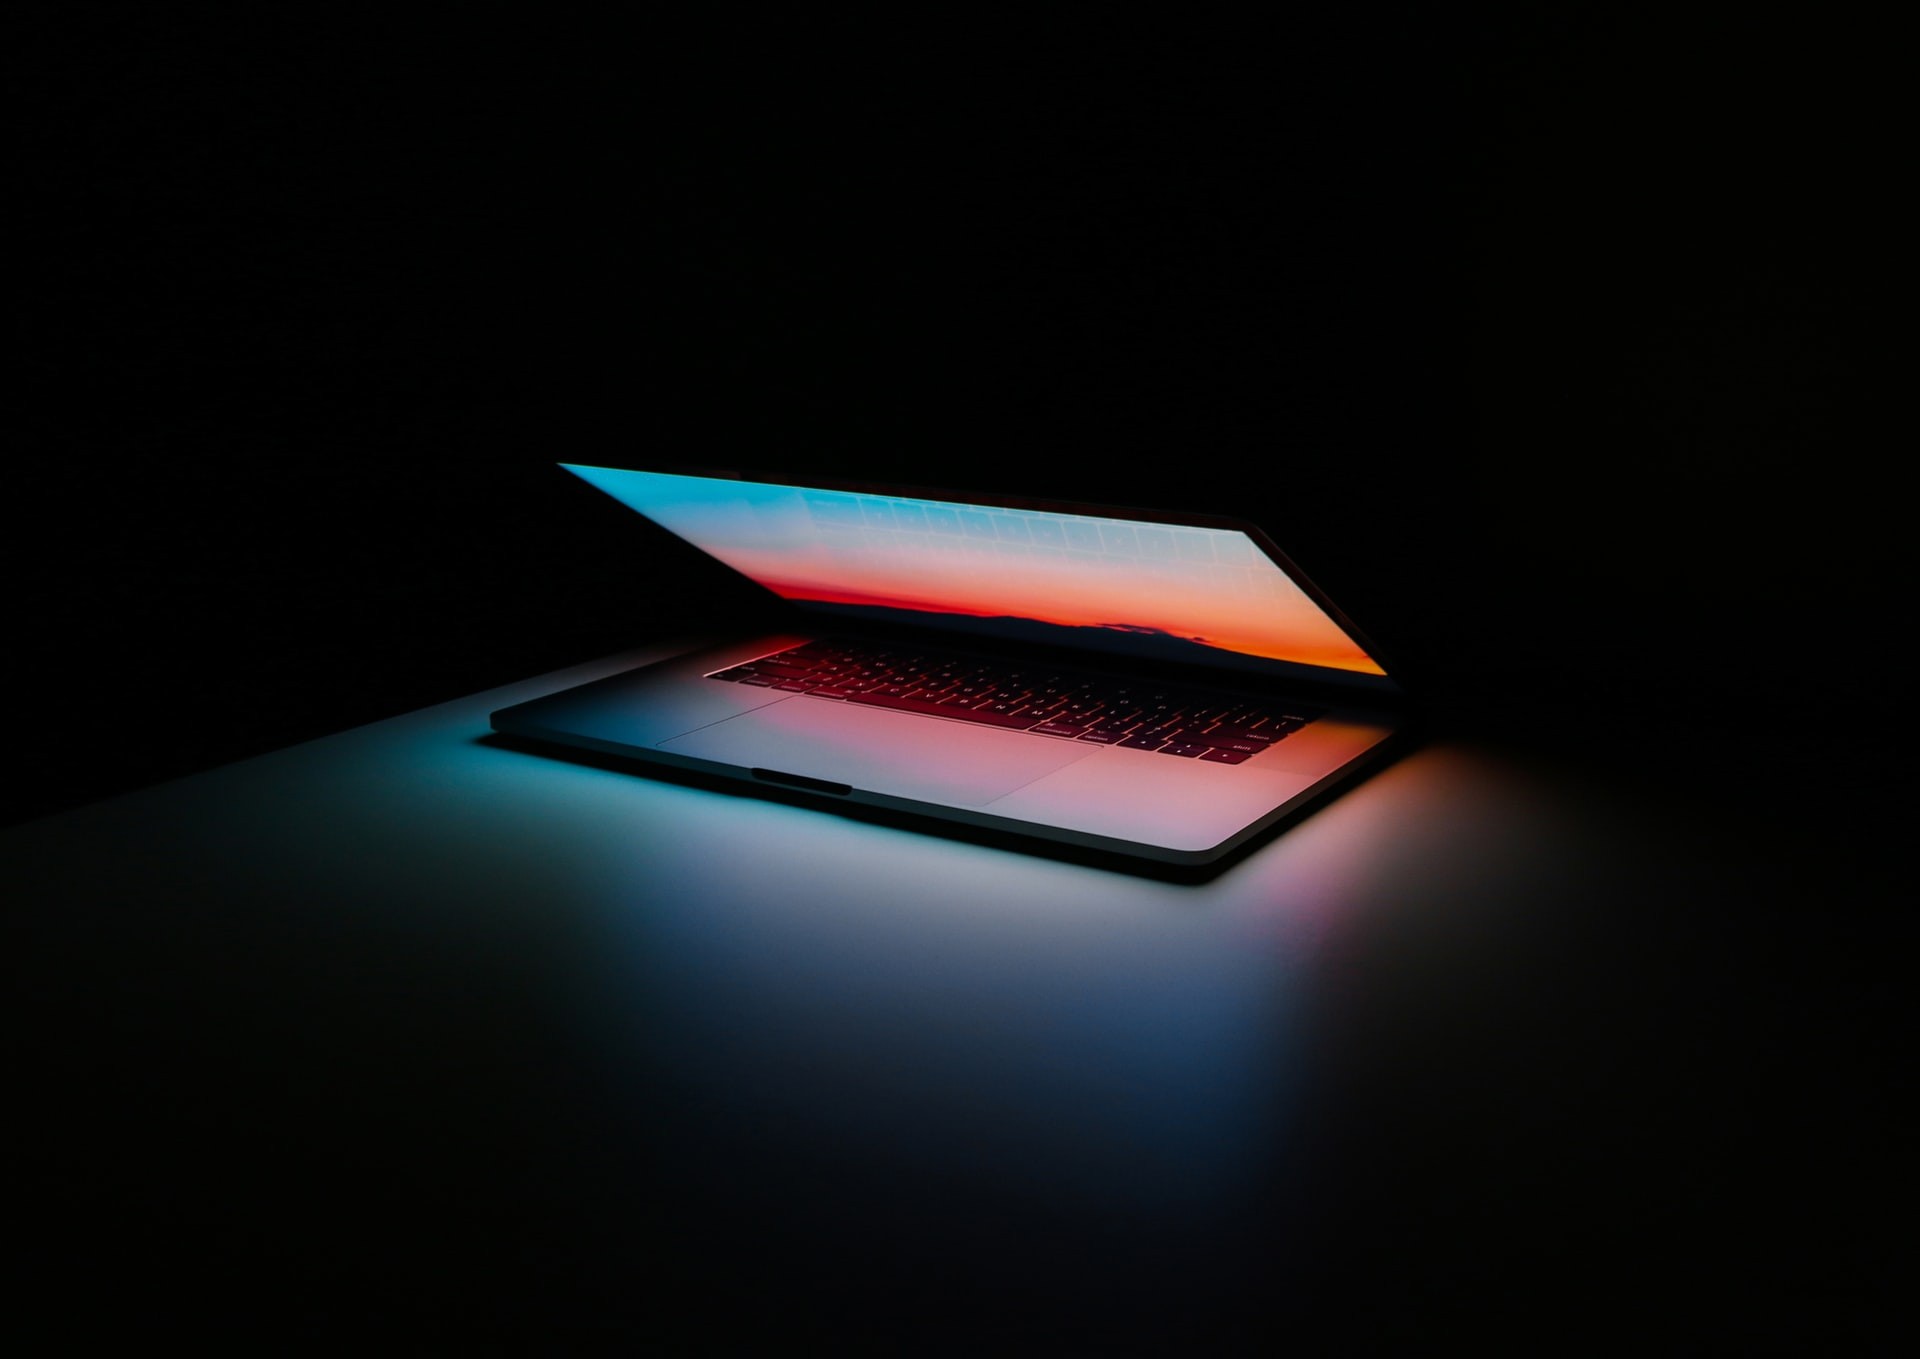 A sleek laptop reflecting a vibrant sunset in a pitch black room.